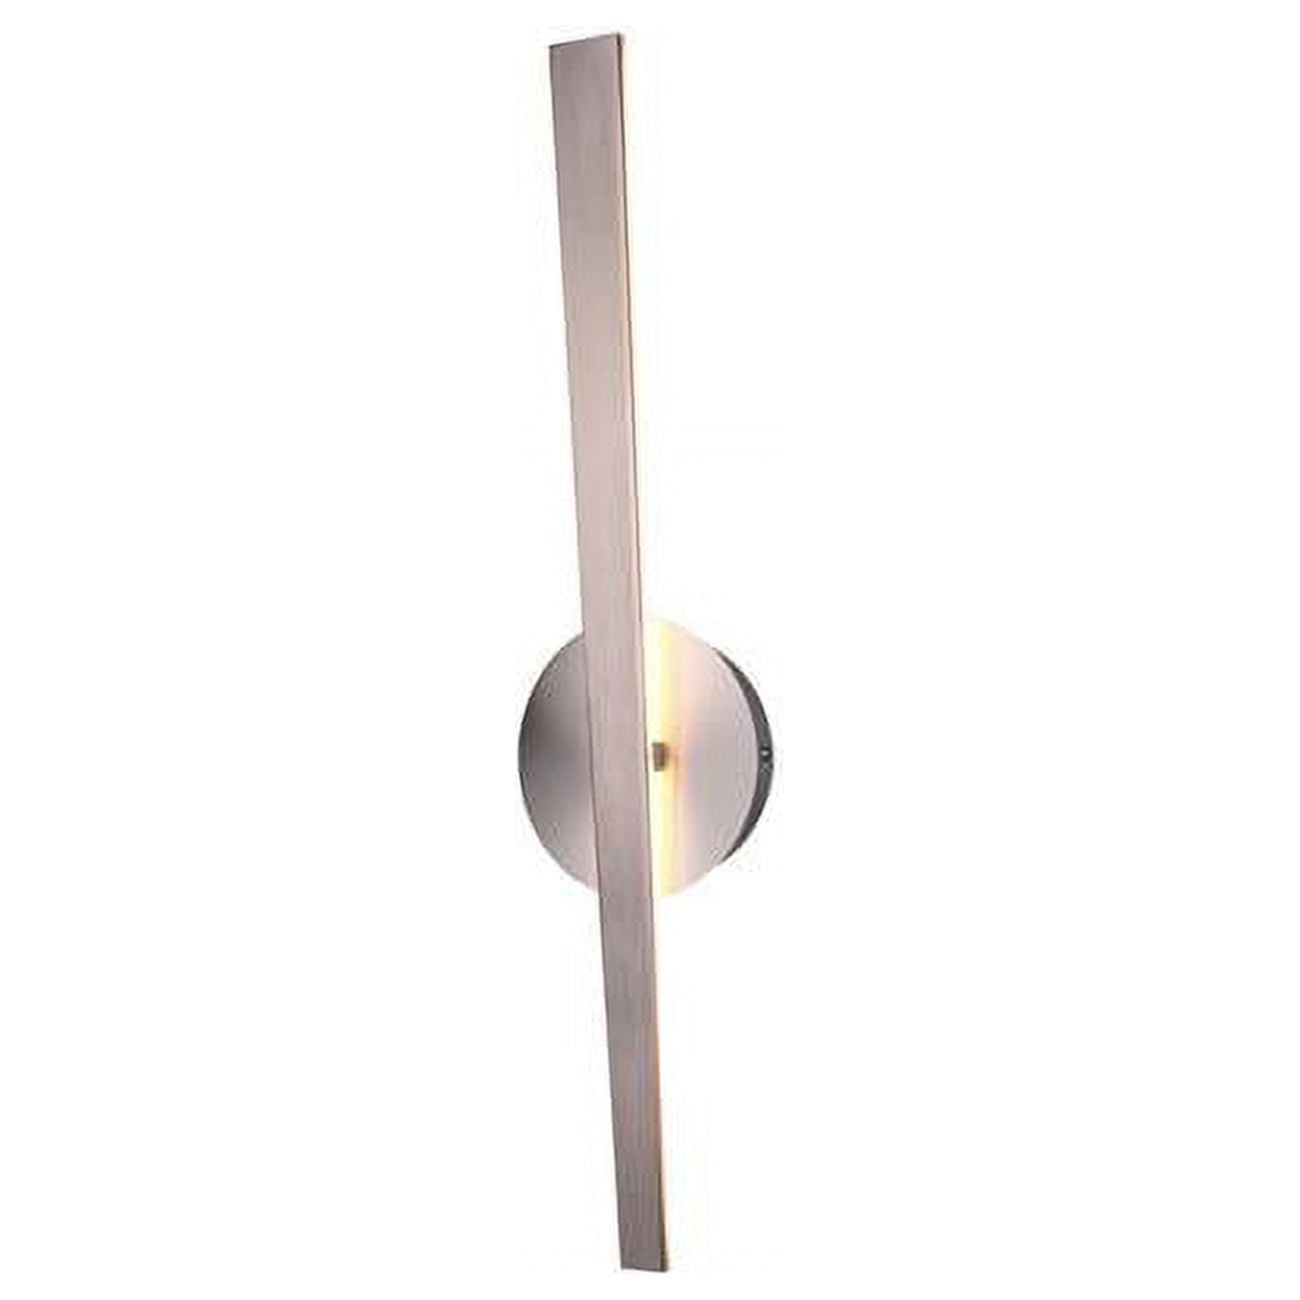 Picture of Arnsberg 225870907 Flagstaff Wall Sconce, Satin Nickel